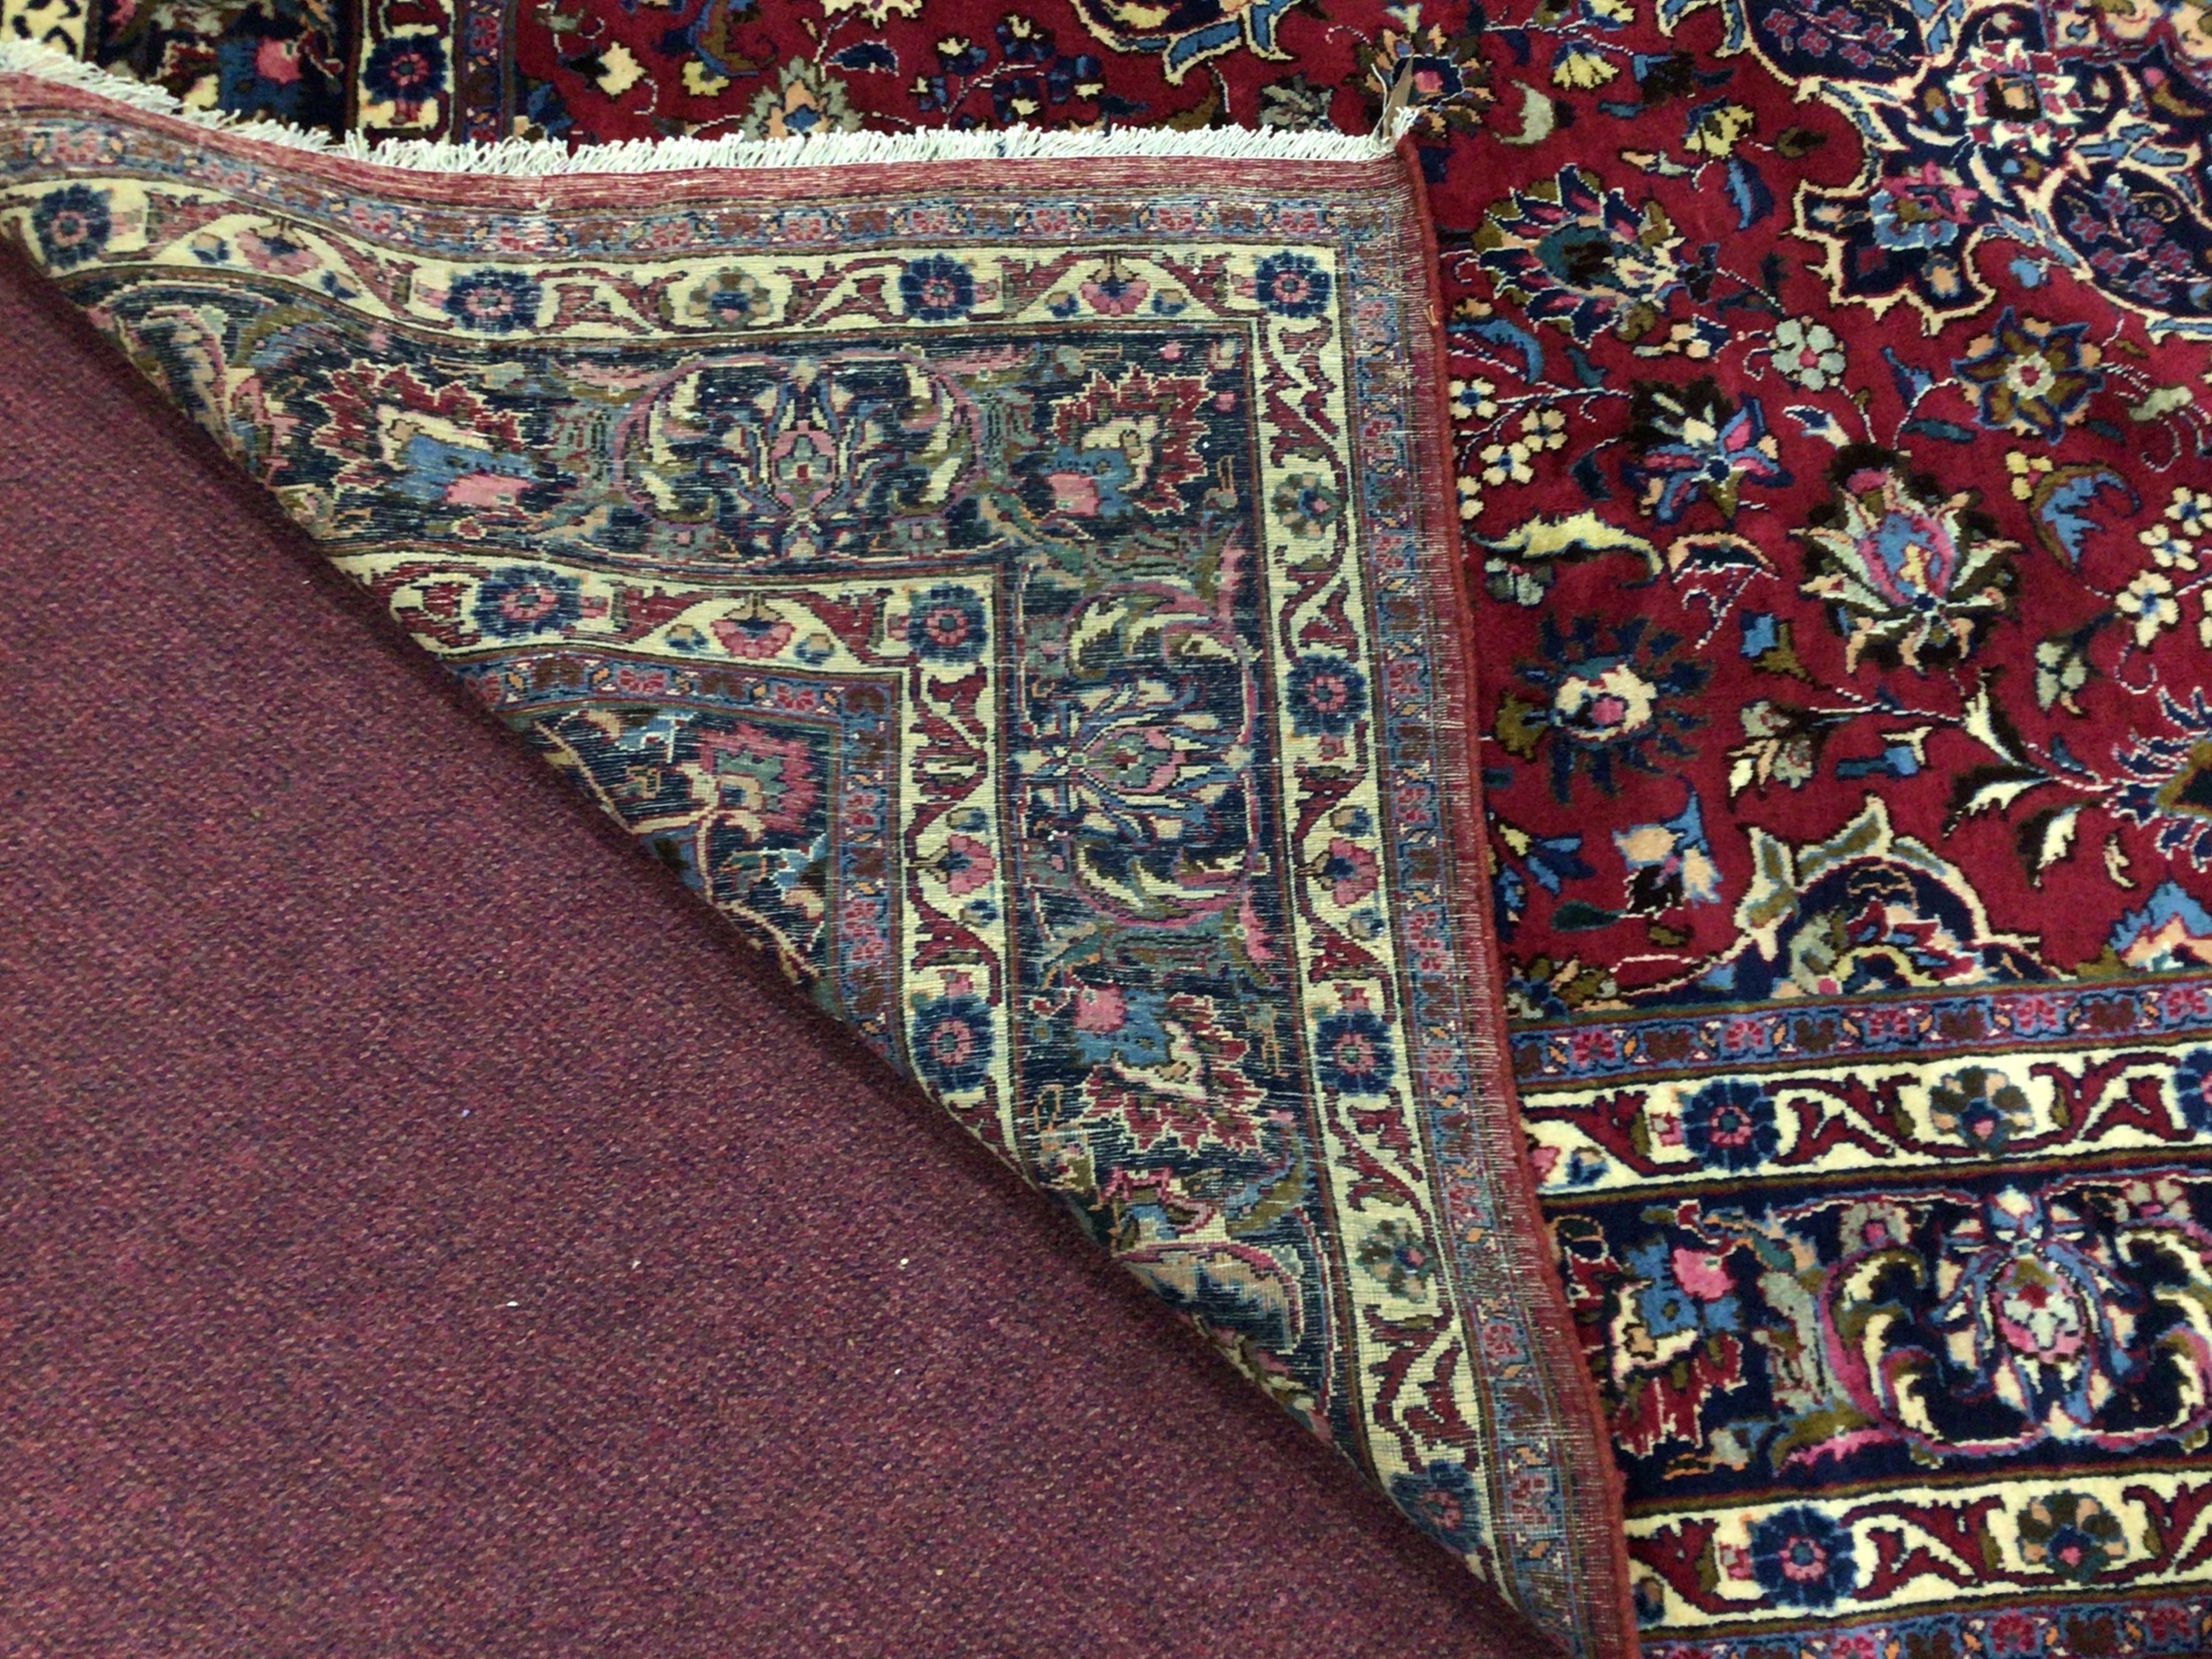 A PERSIAN MESHED RUG - Image 3 of 3